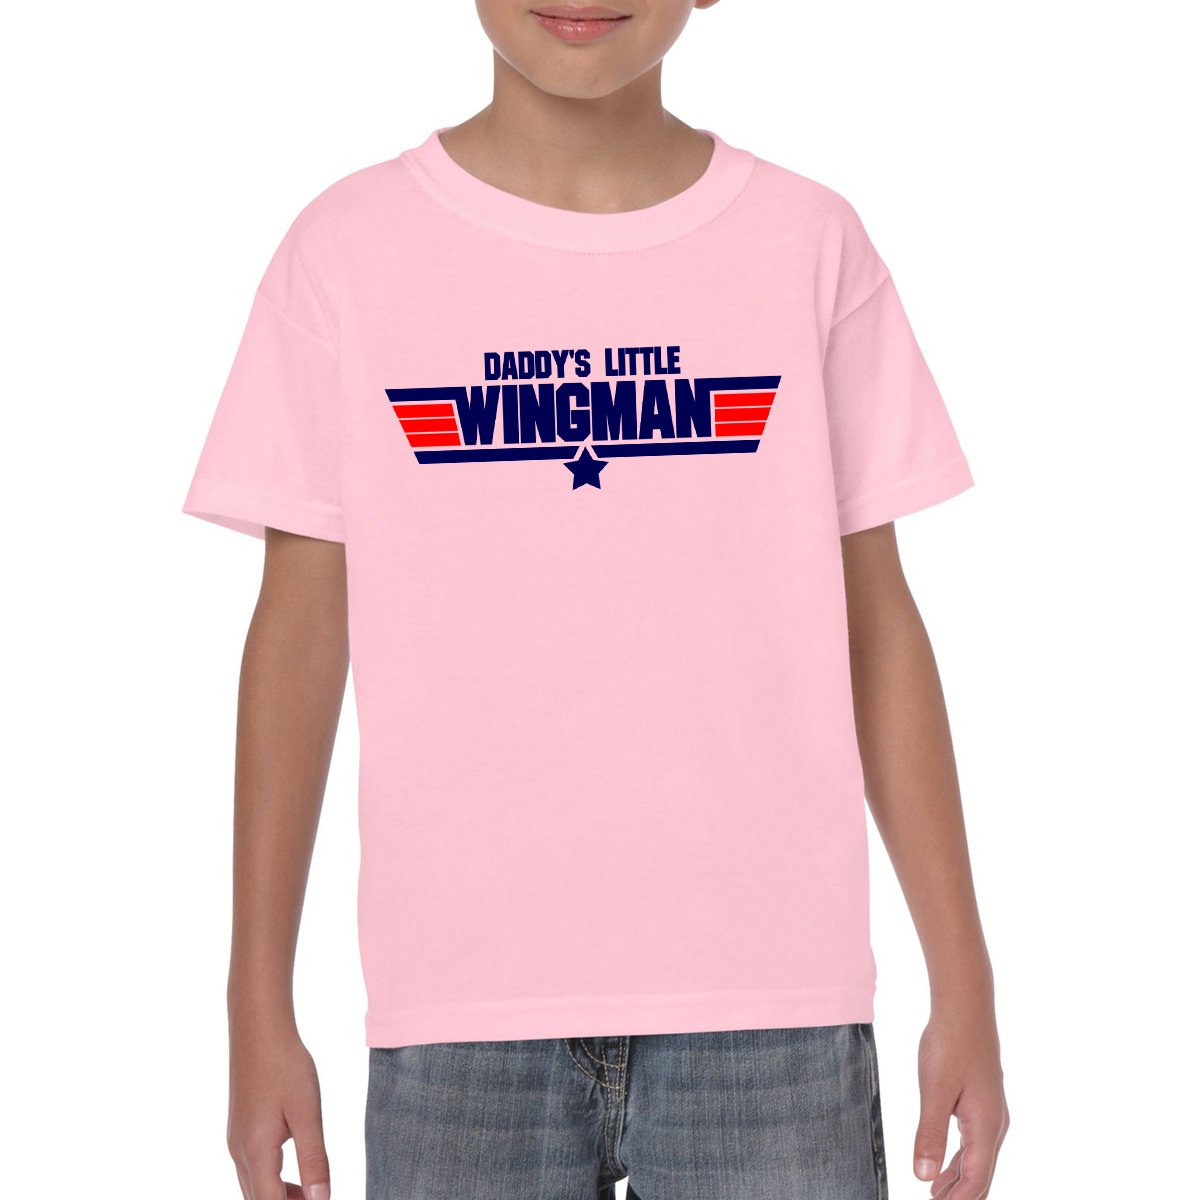 DADDY's LITTLE WINGMAN Youth Semi-Fitted T-Shirt